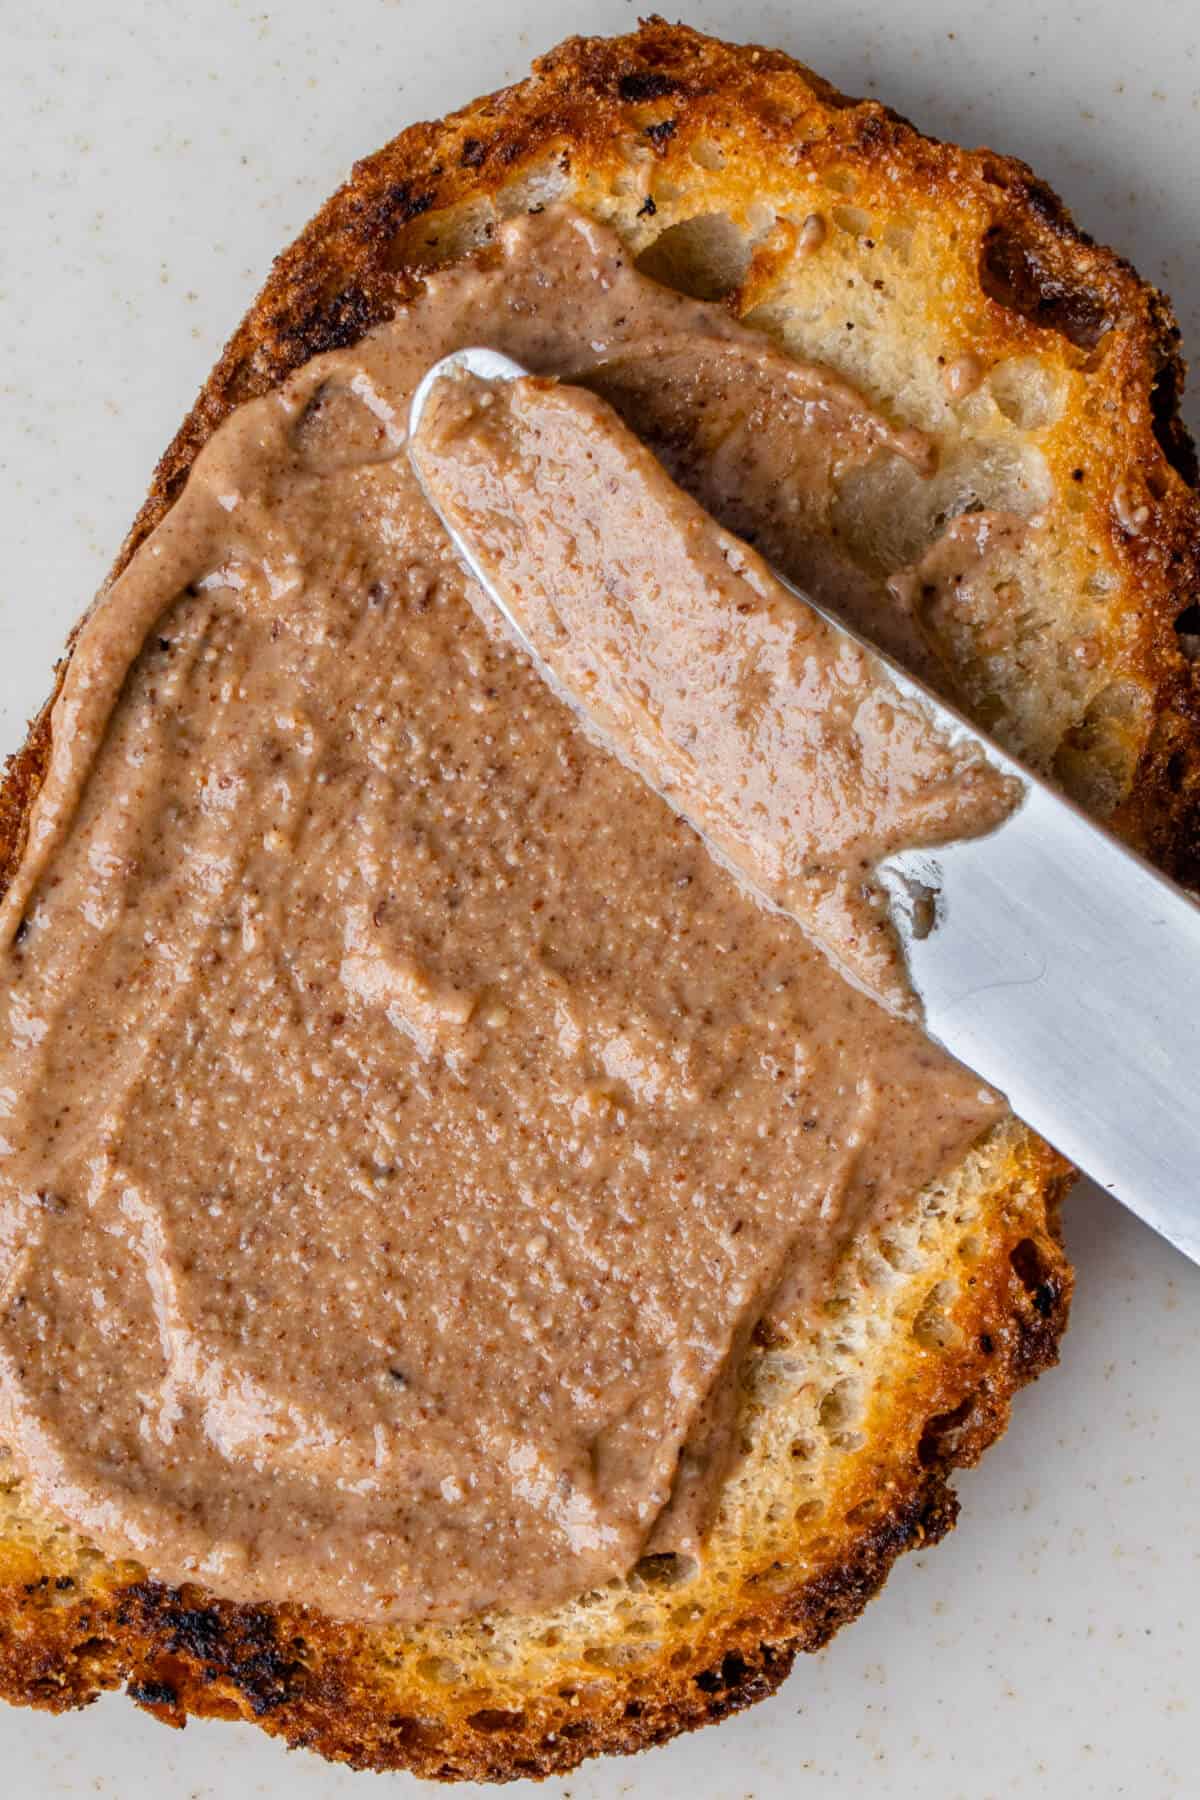 Almond butter being spread on toast